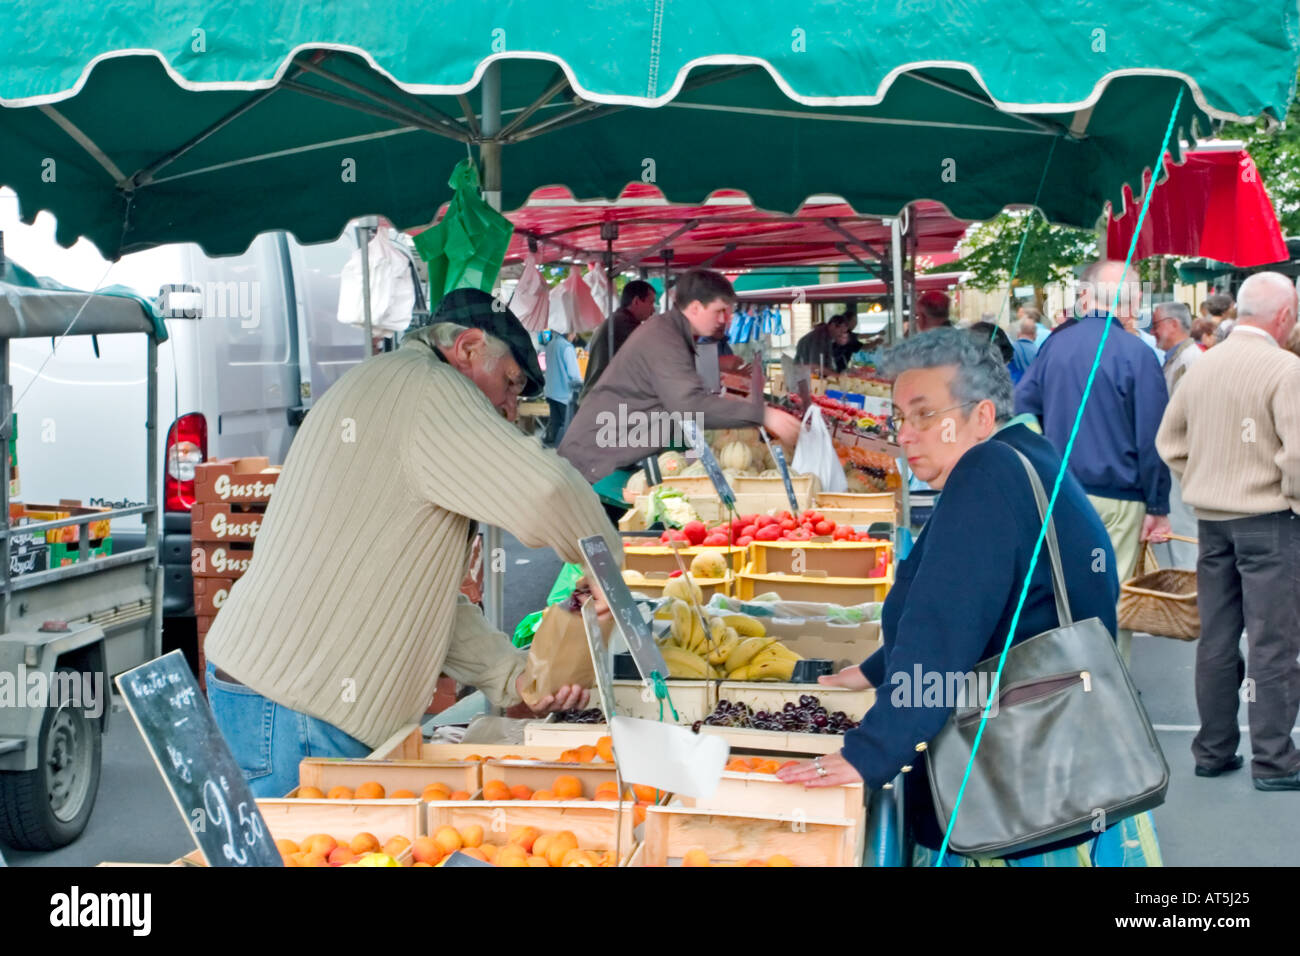 Shopping for fresh fruit and vegetables stall at street market in Bayeux France Stock Photo